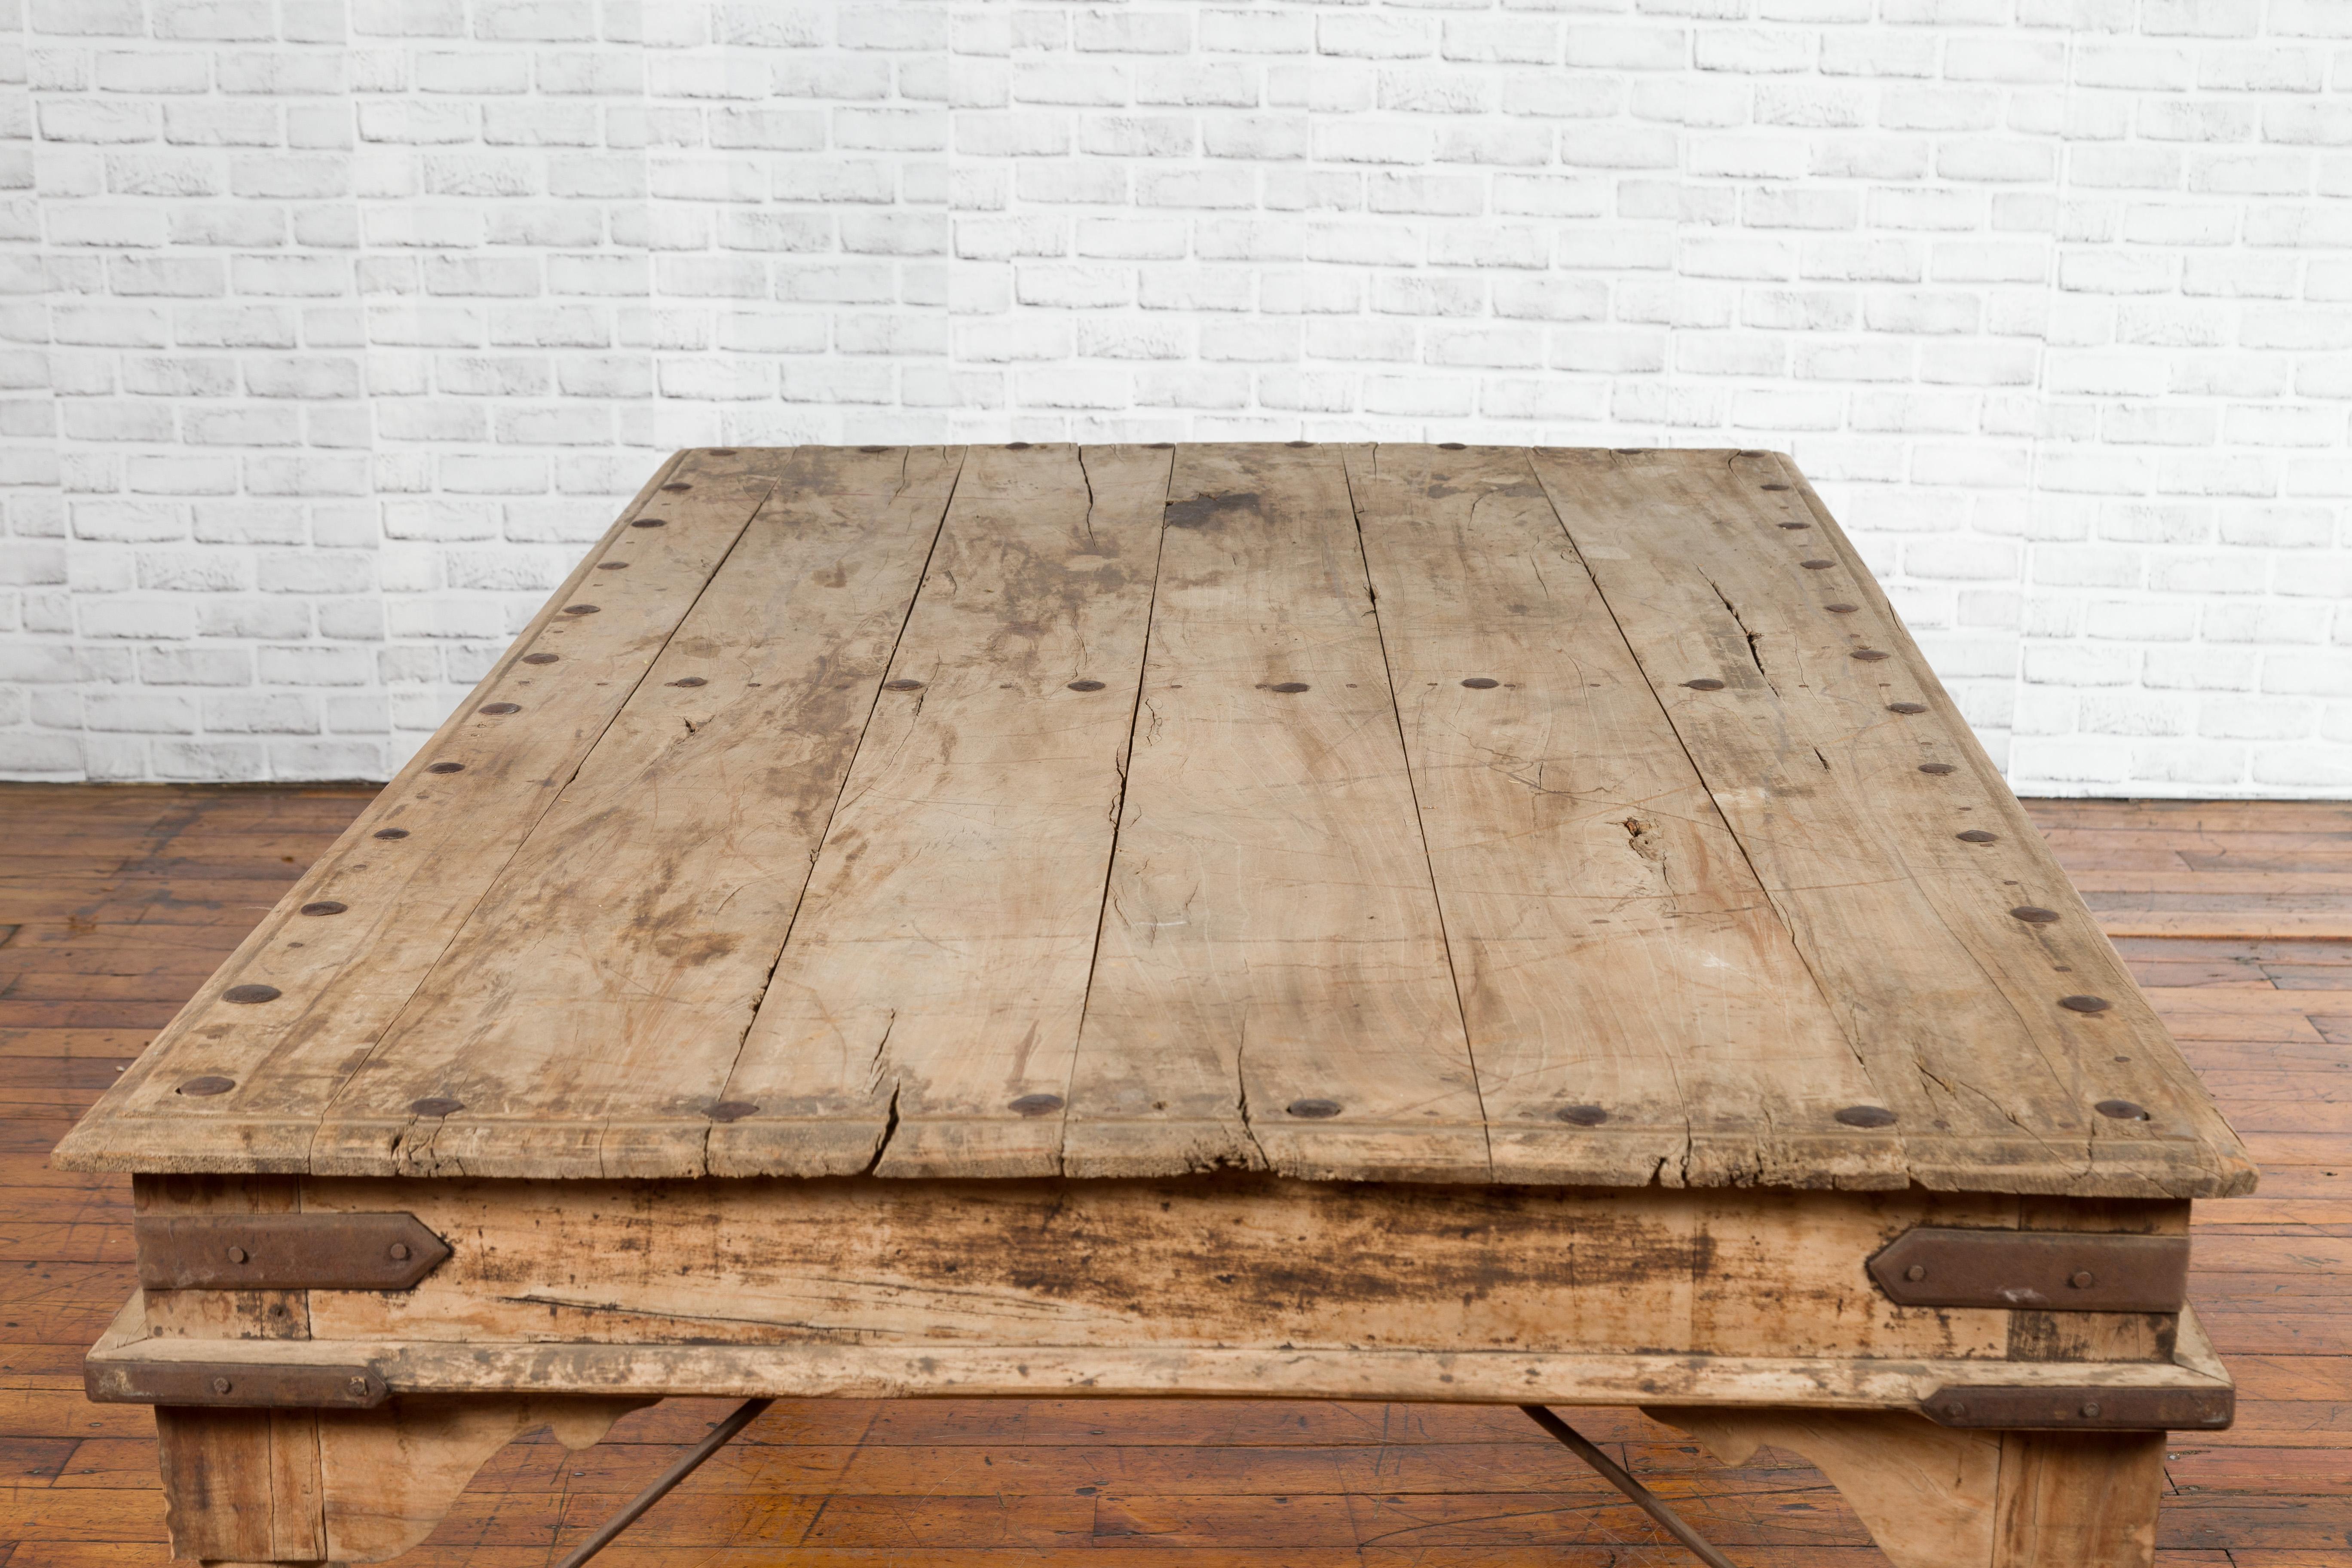 Rustic Indian Low Table with Distressed Patina, Iron Details and Baluster Legs For Sale 11